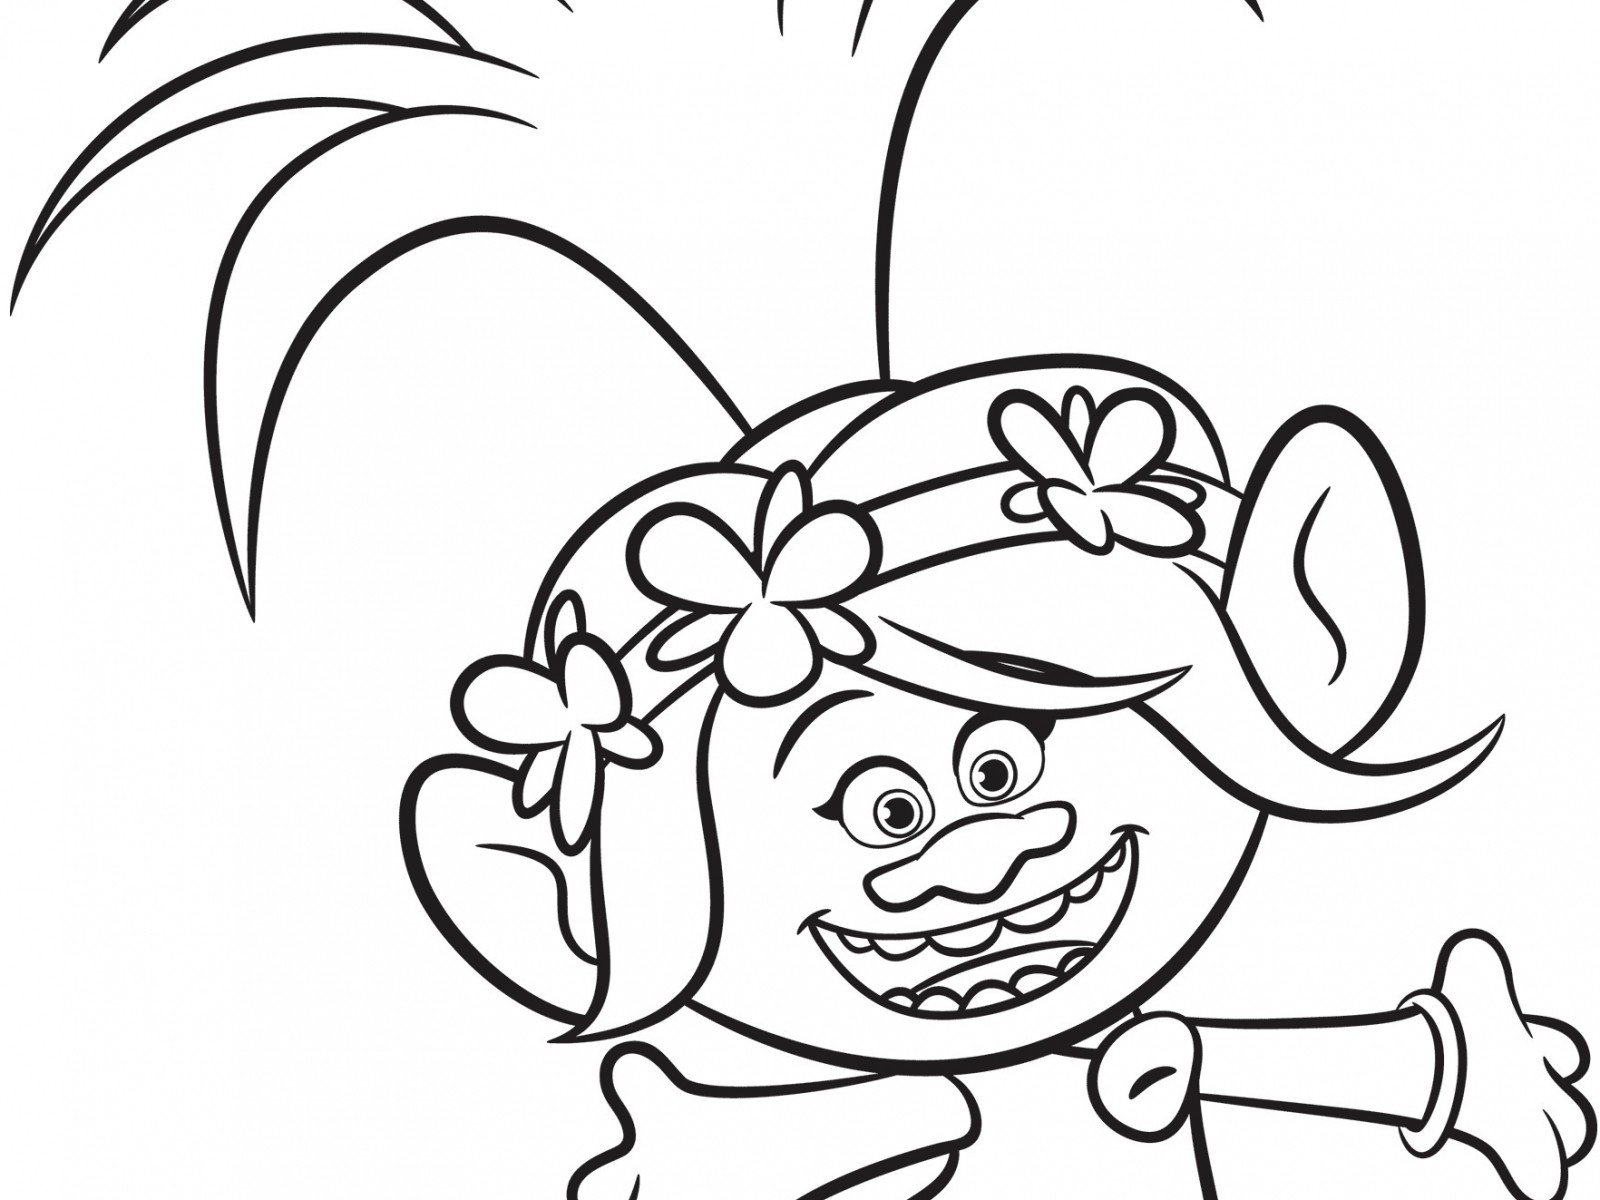 Coloring Pages Trolls Fresh Branch & Poppy From Trolls Coloring Page ...